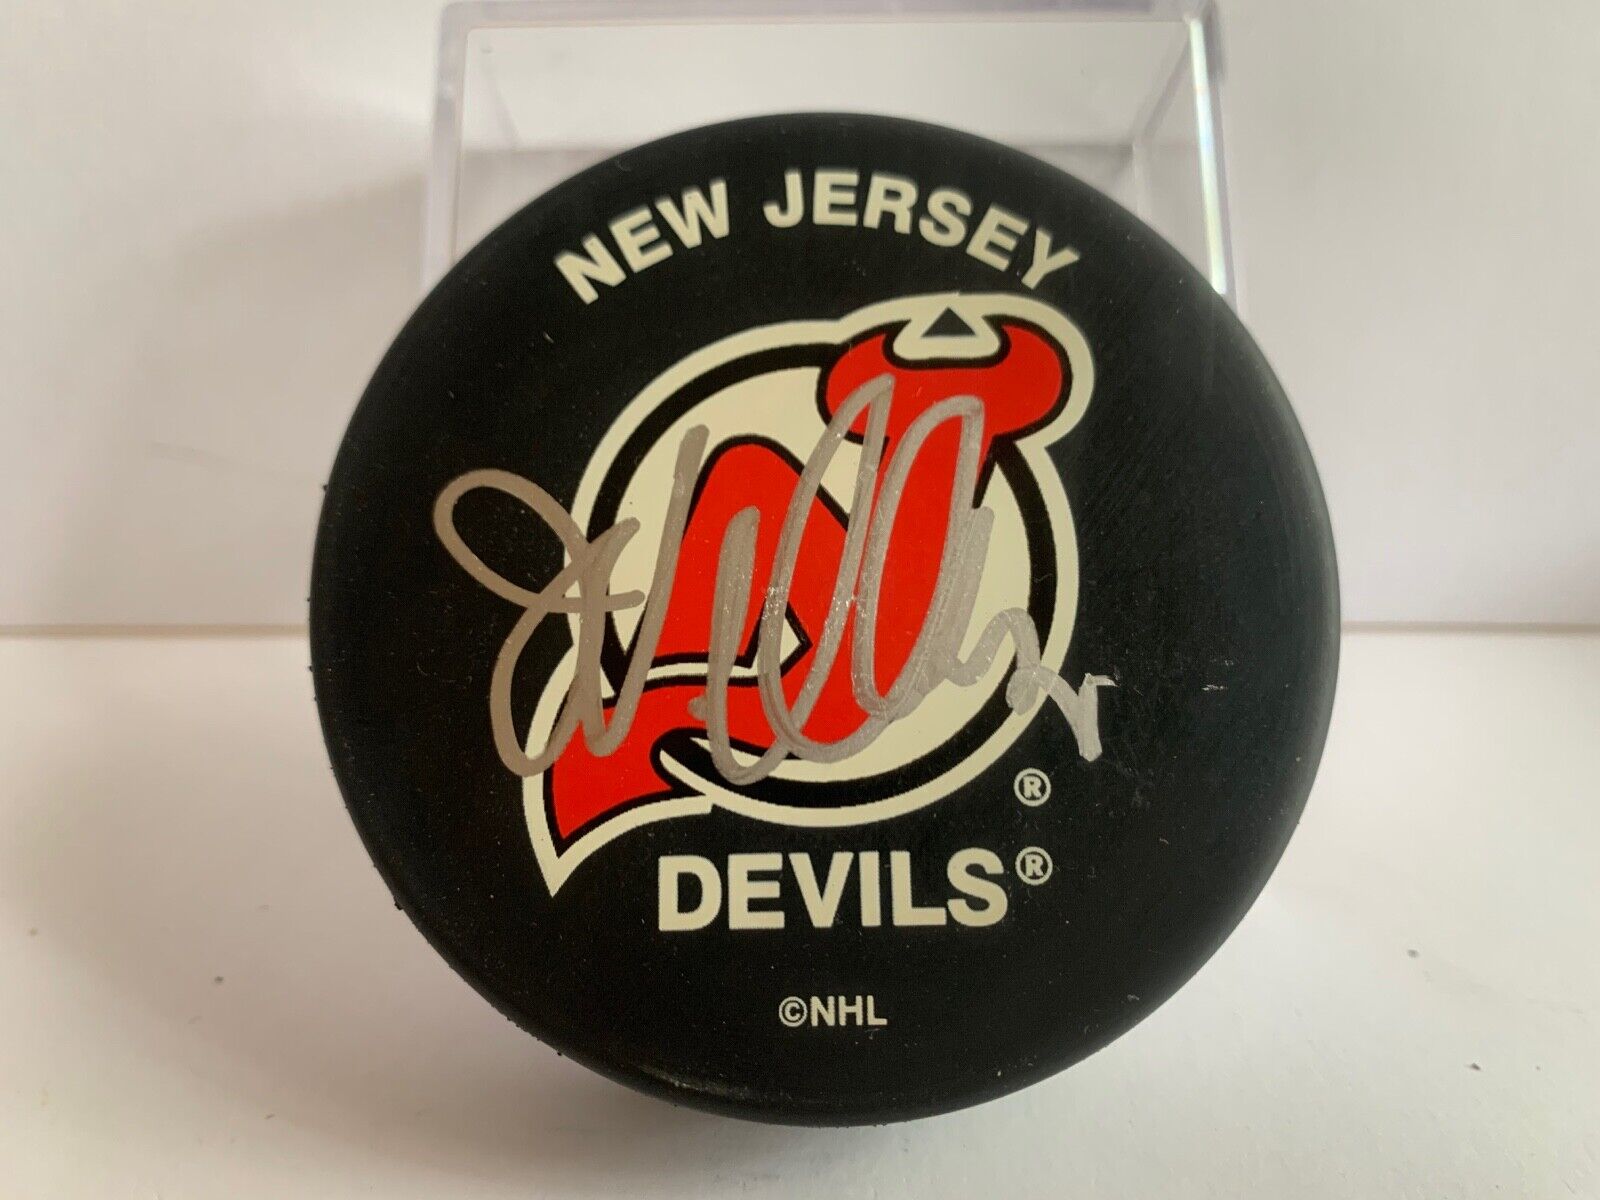 John Vanbresbrouck Autographed Official NHL Hockey Puck with New Jersey Logo